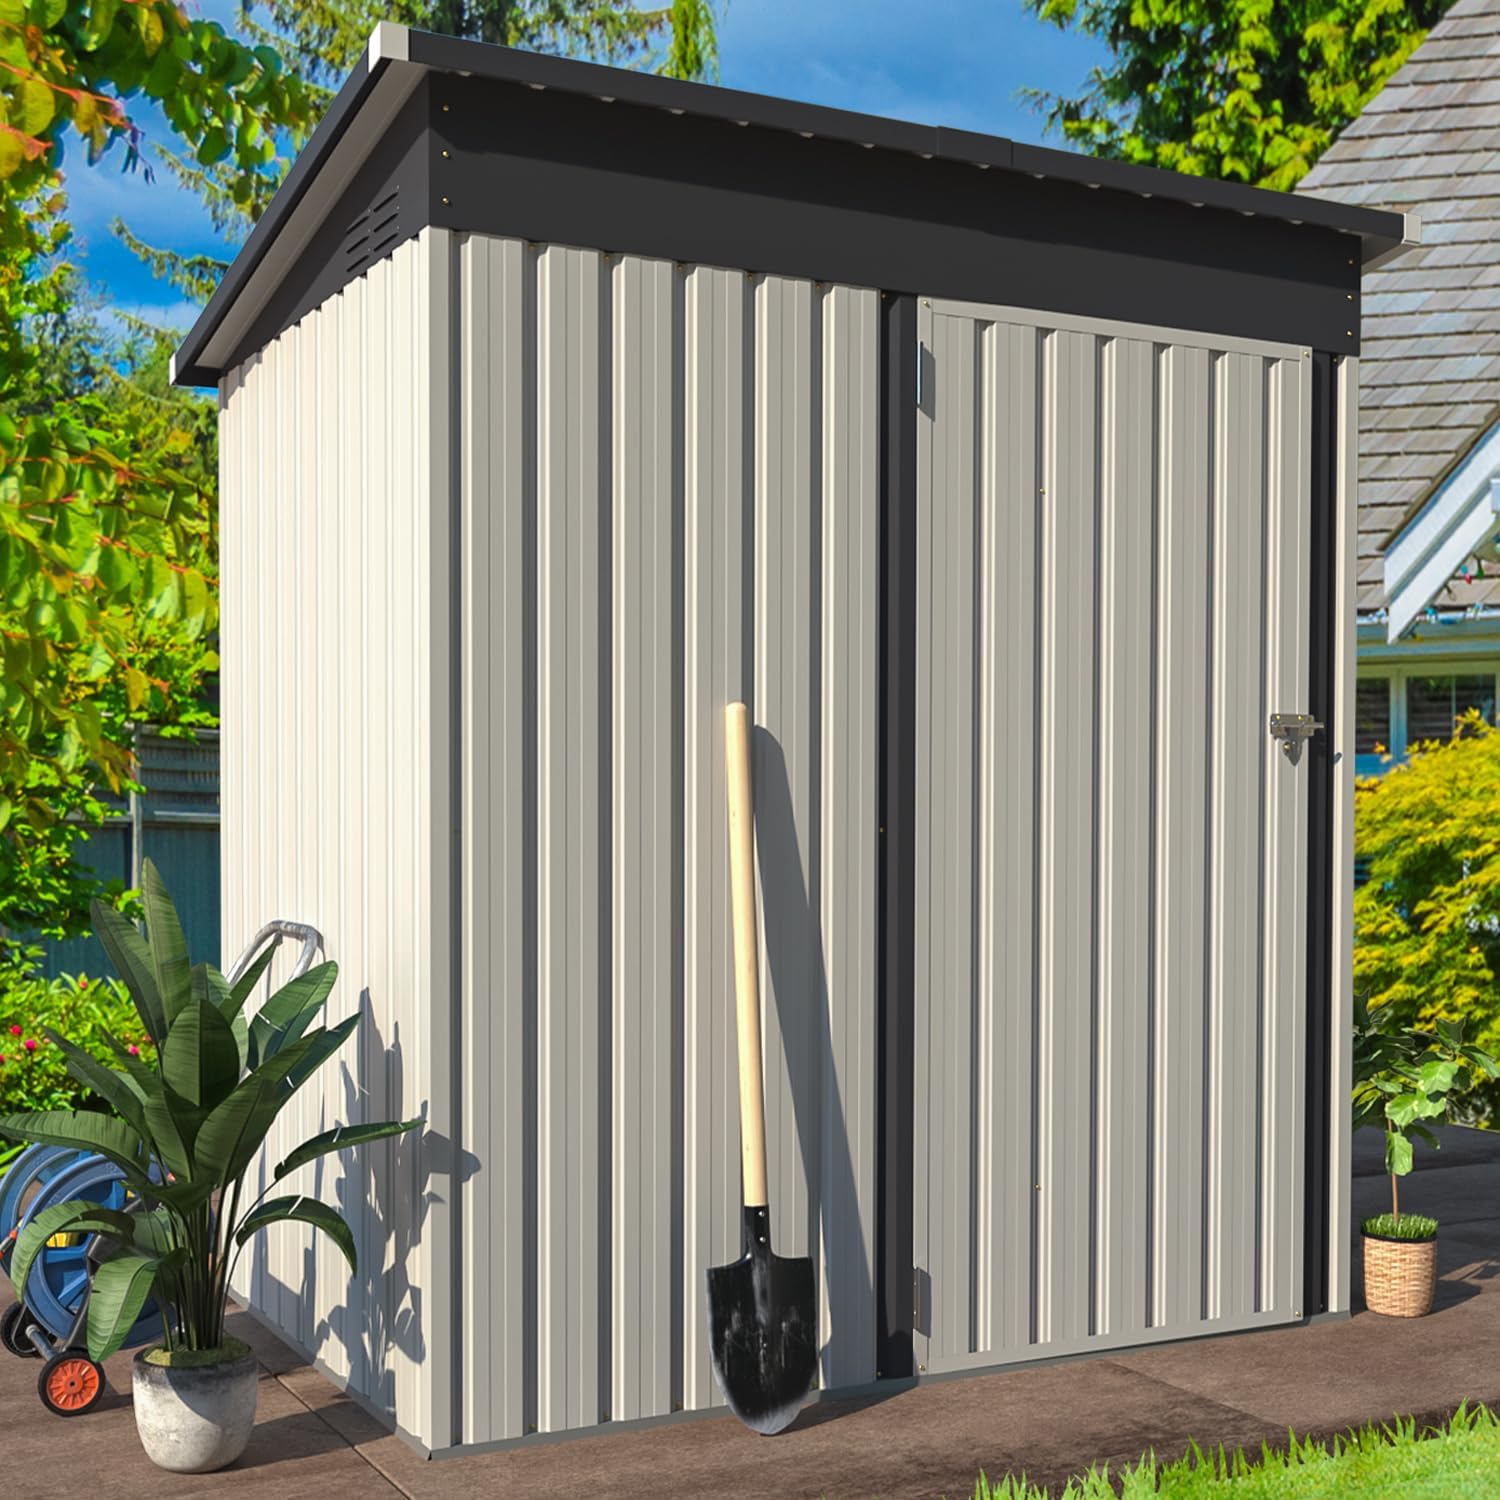 AECOJOY 5' x 3' Outdoor Storage Shed, Small Metal Shed with Lockable Door, Utility and Tool Storage for Garden, Backyard, Patio, Outside use in White